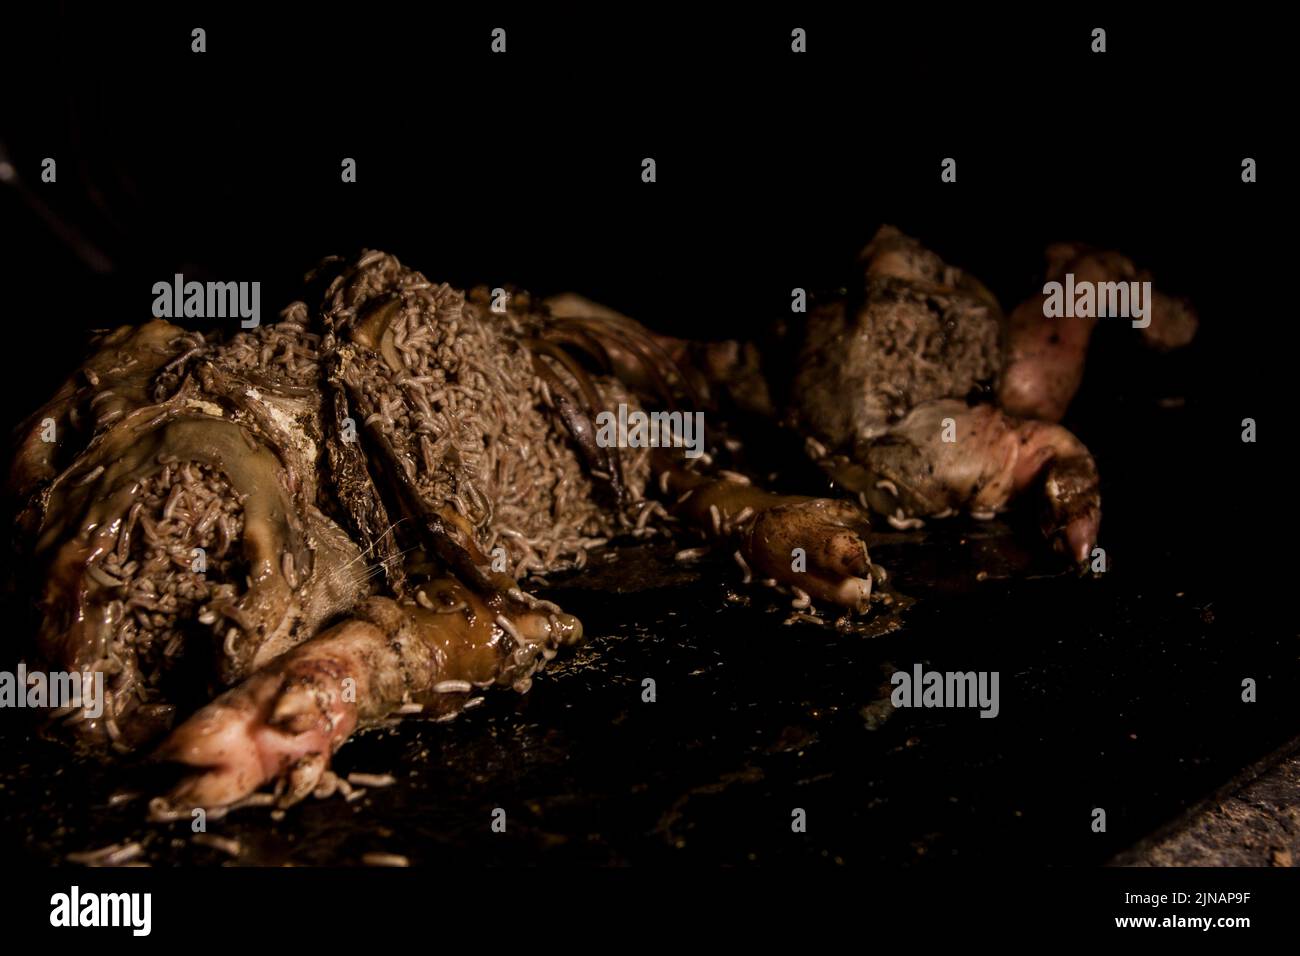 Decomposition stage 4 advanced decay fresh pig corpse Stock Photo